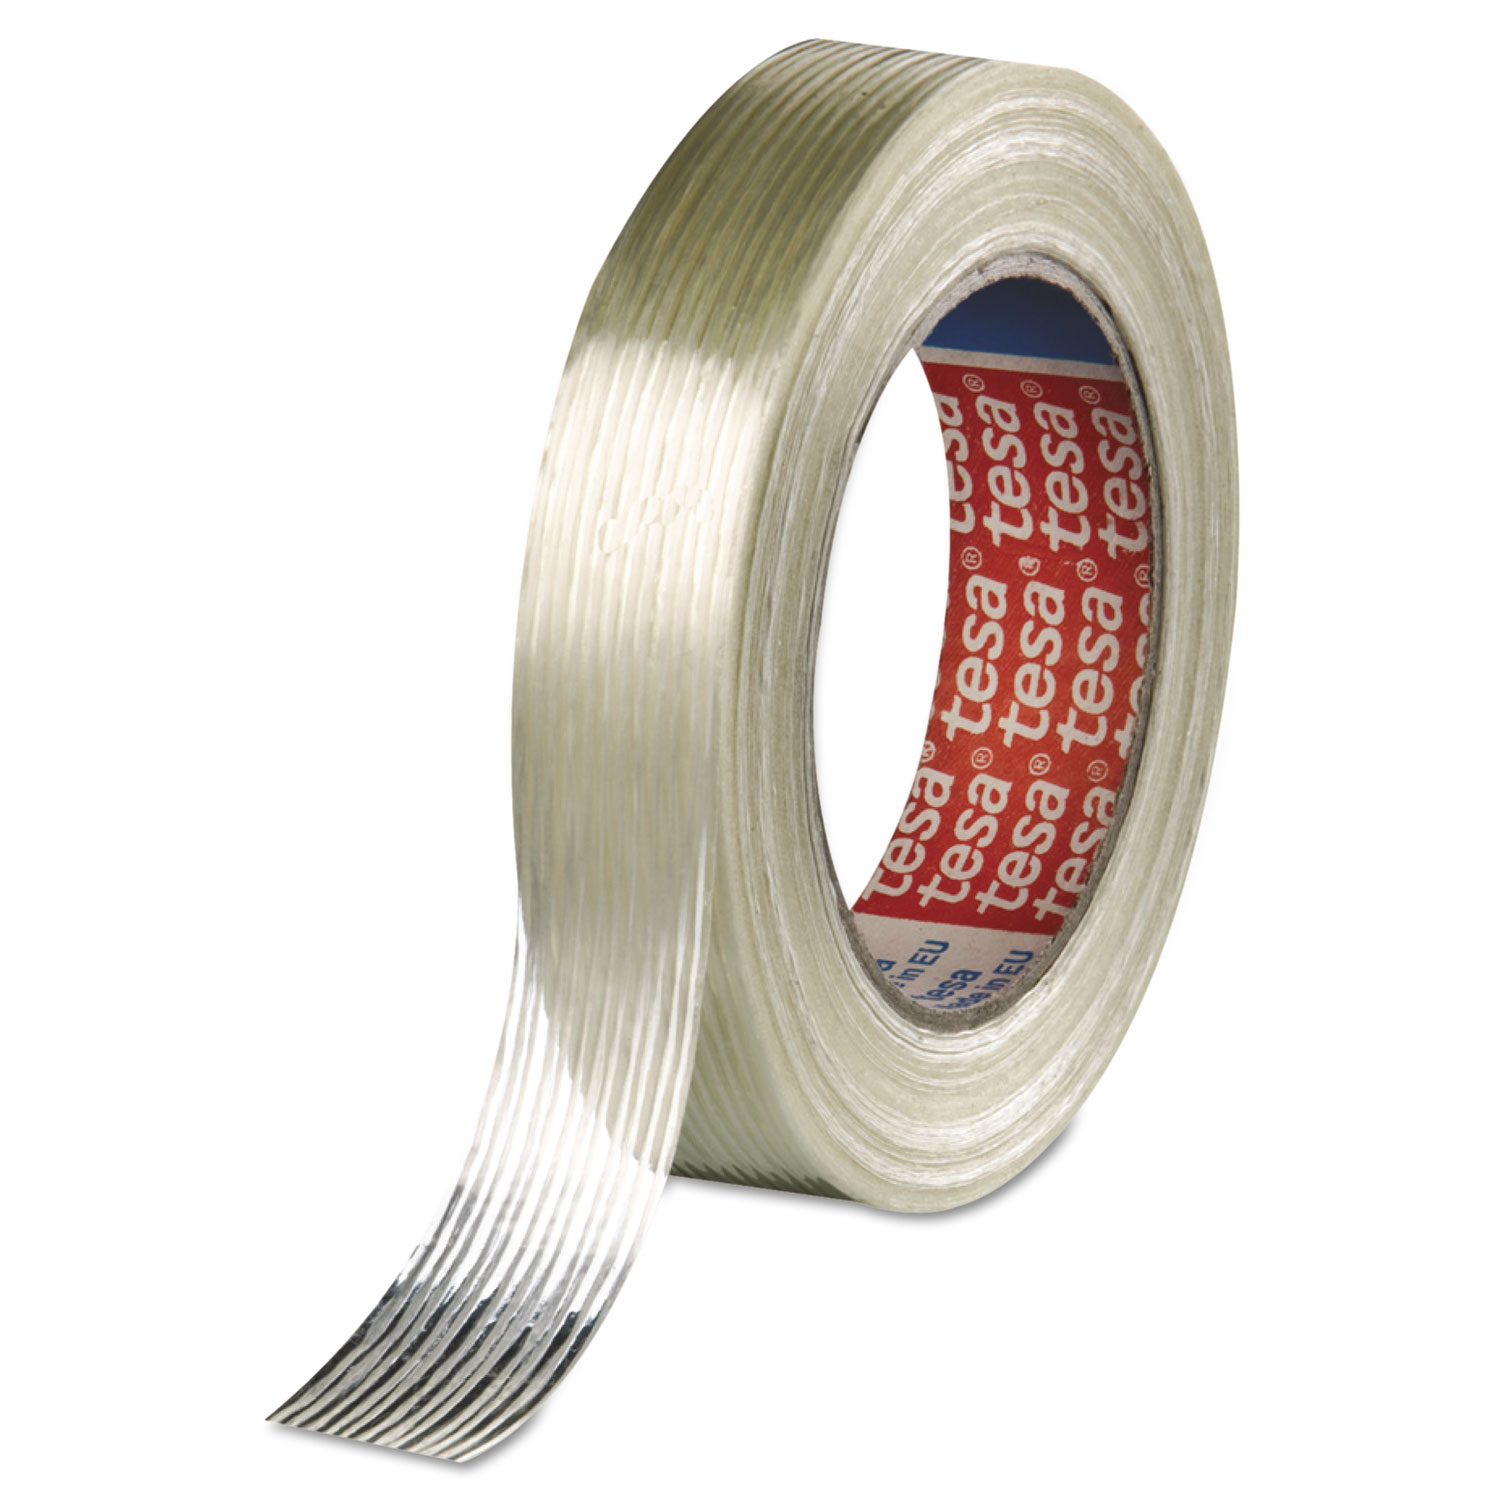 Economy Grade Filament Strapping Tape, 3/4 x 60yd, Clear